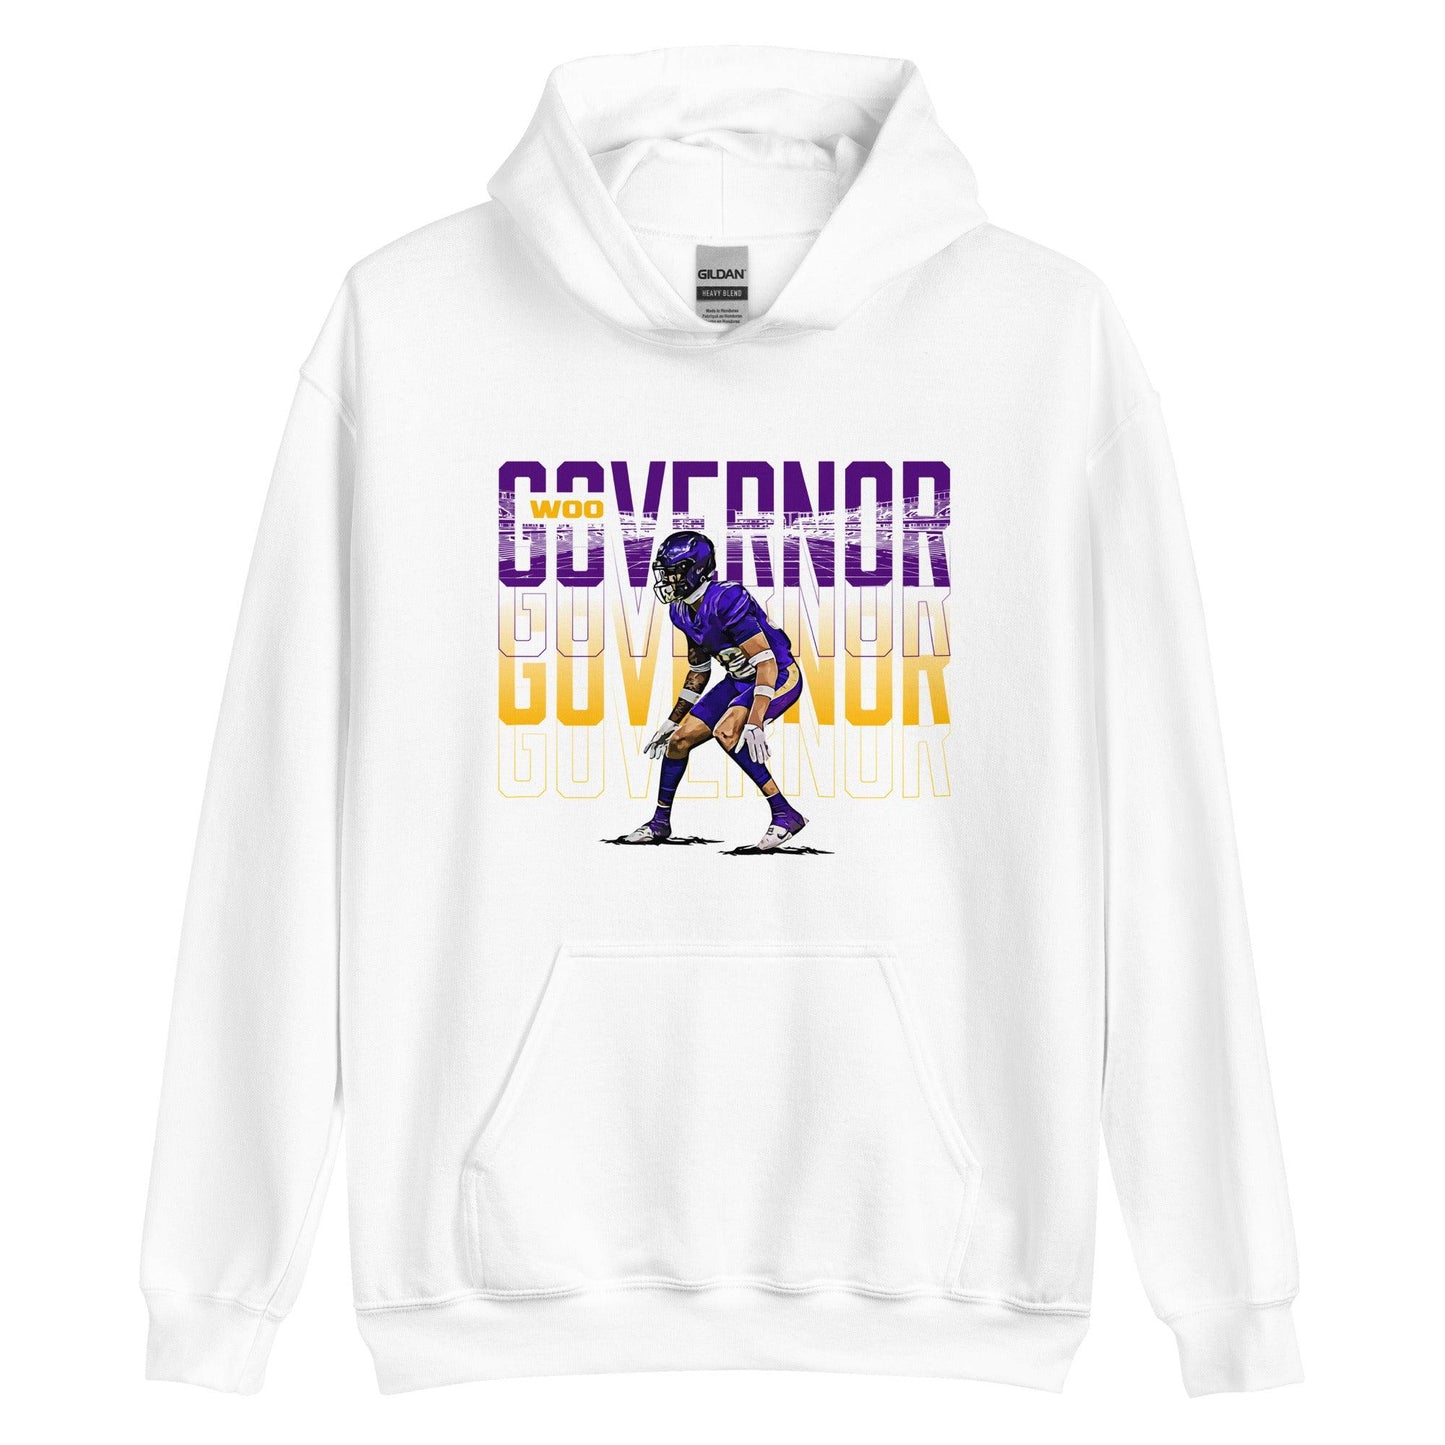 Woo Governor "Gameday" Hoodie - Fan Arch